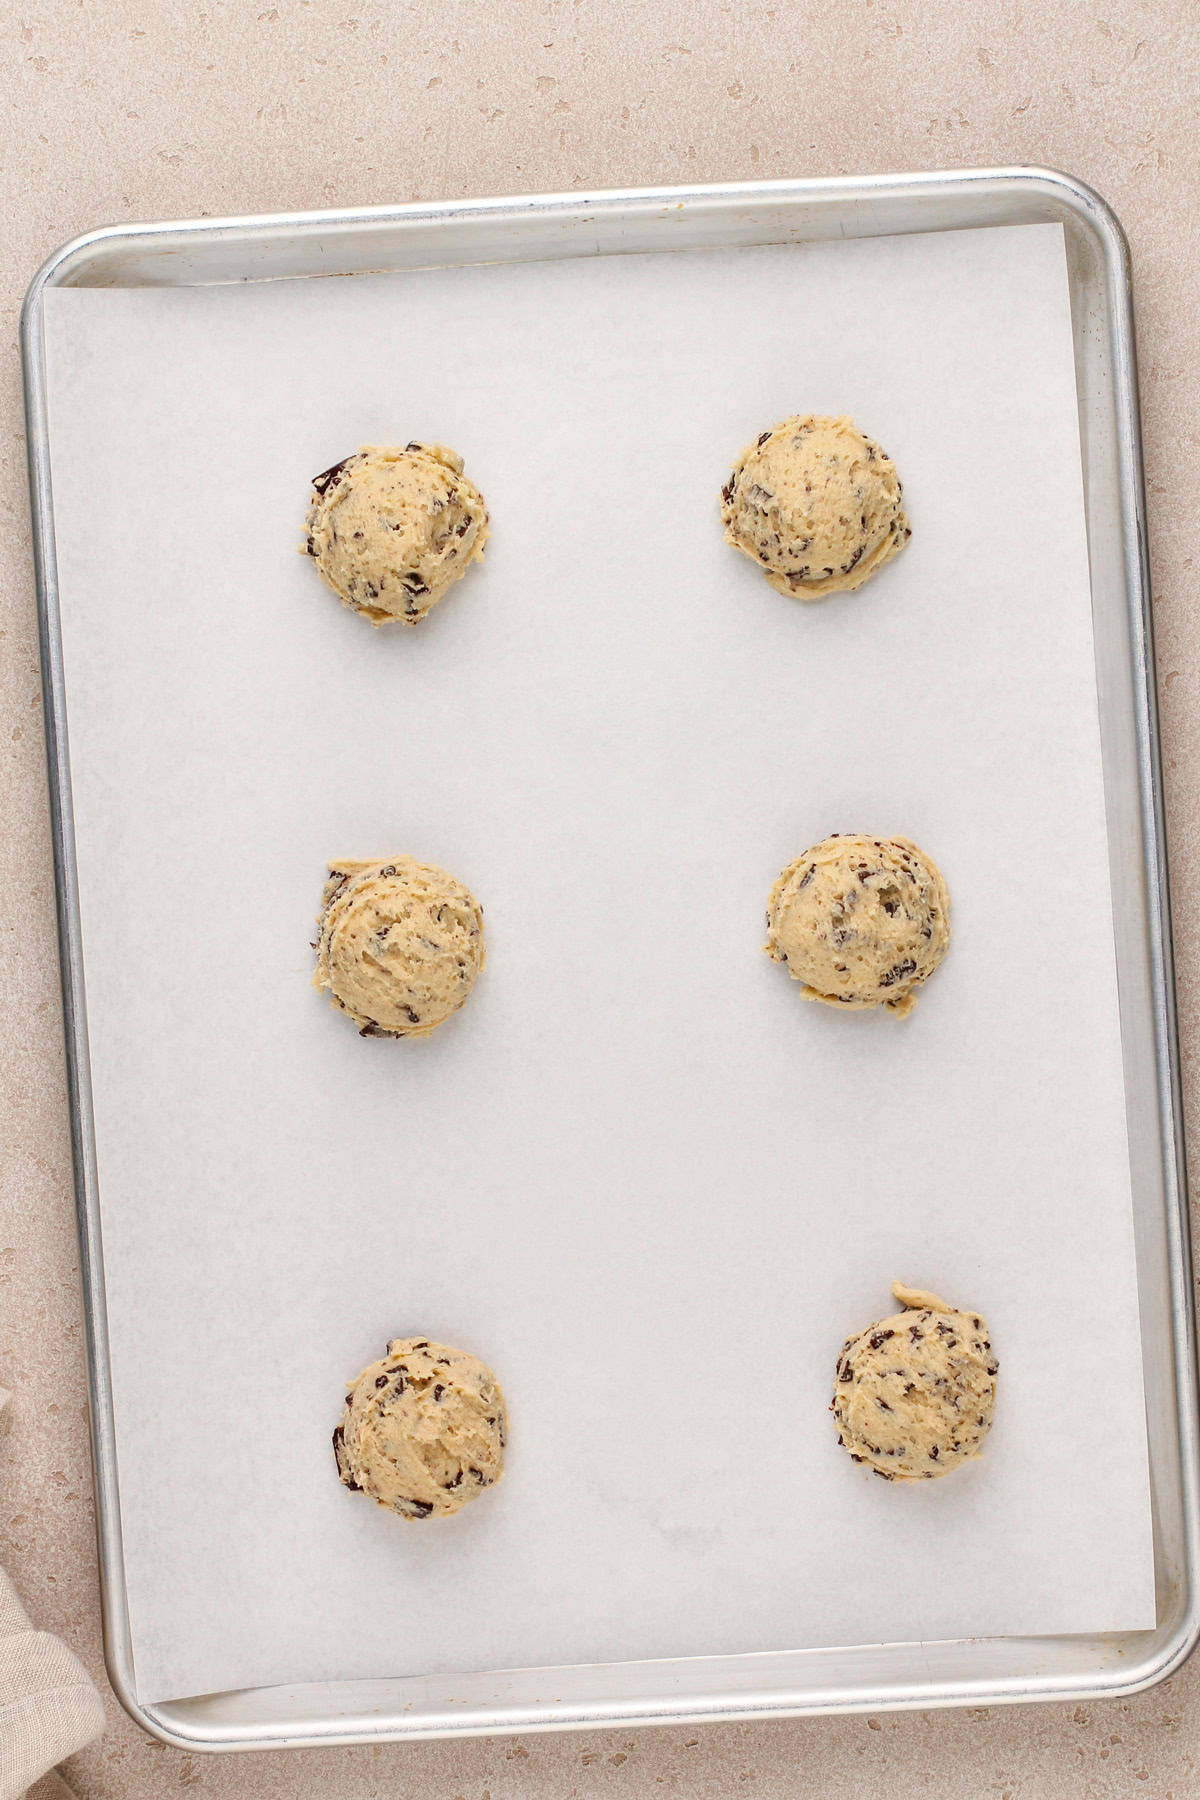 Scoops of easy chocolate chip cookie dough on a lined baking sheet.